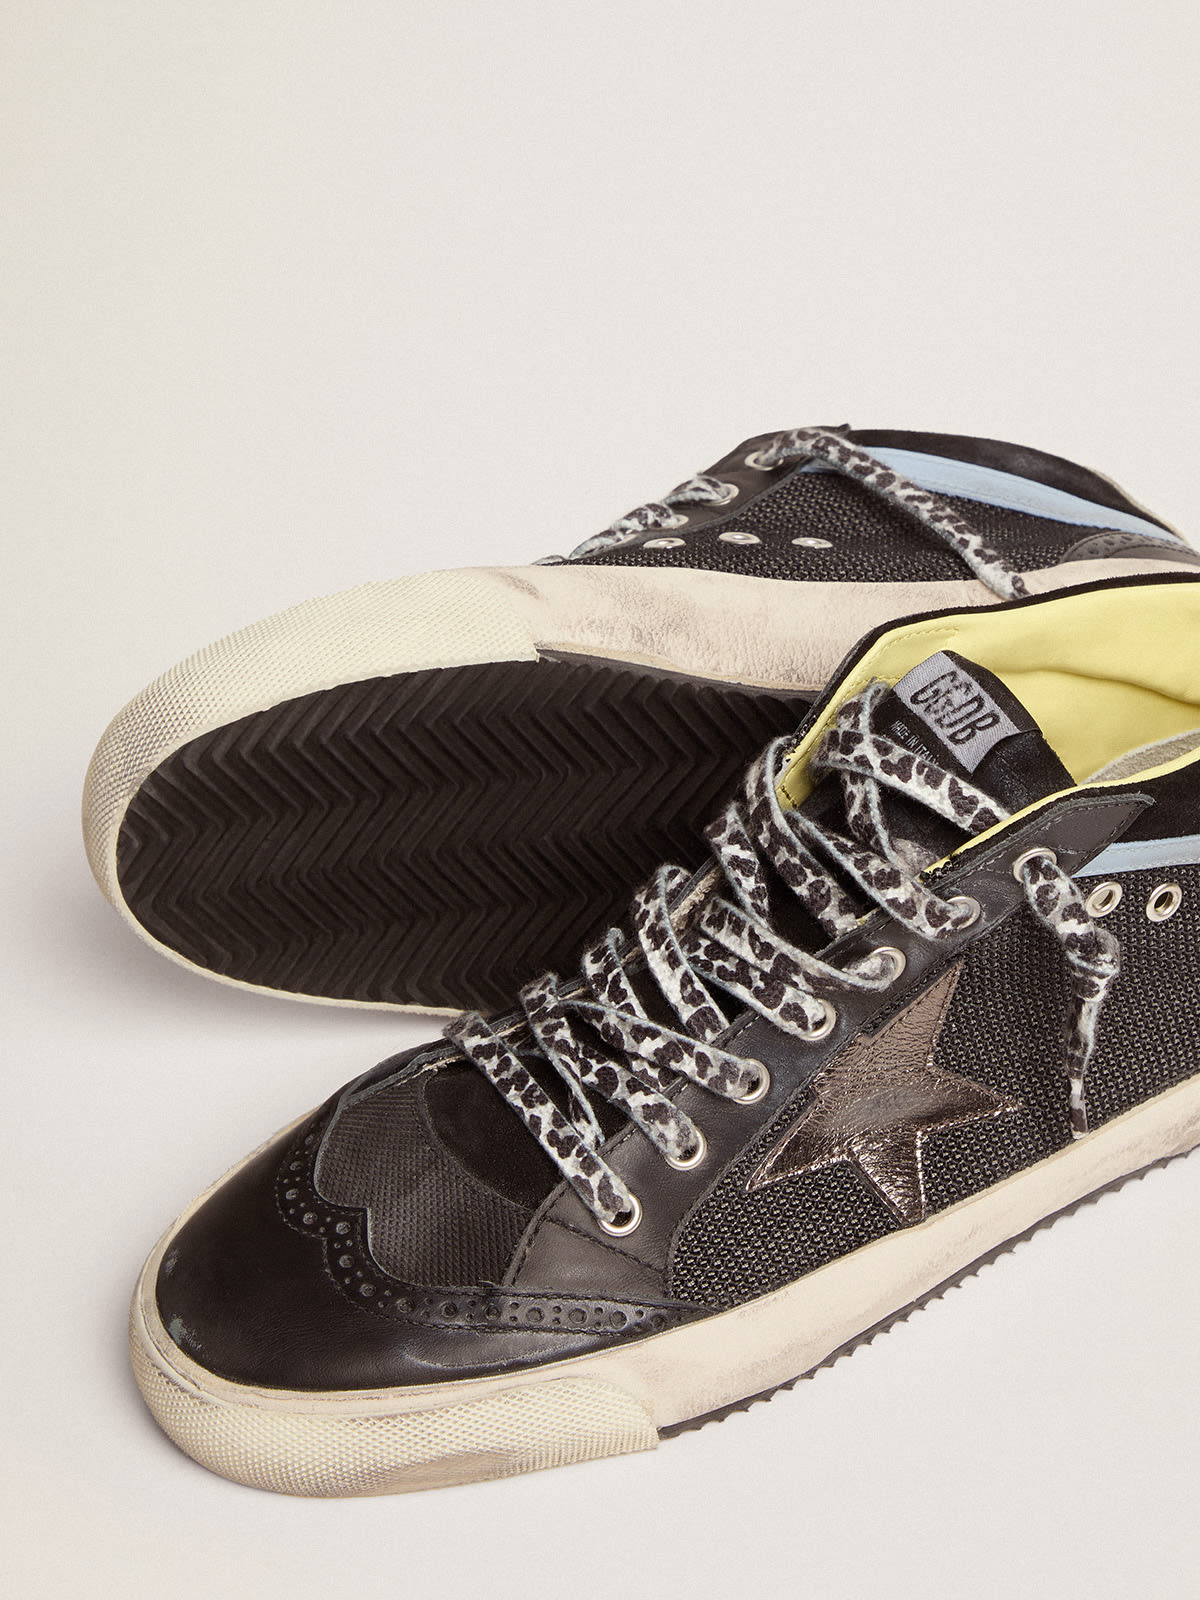 Golden Goose - Mid Star LTD sneakers in black leather and mesh with dark-gray metallic leather star in 